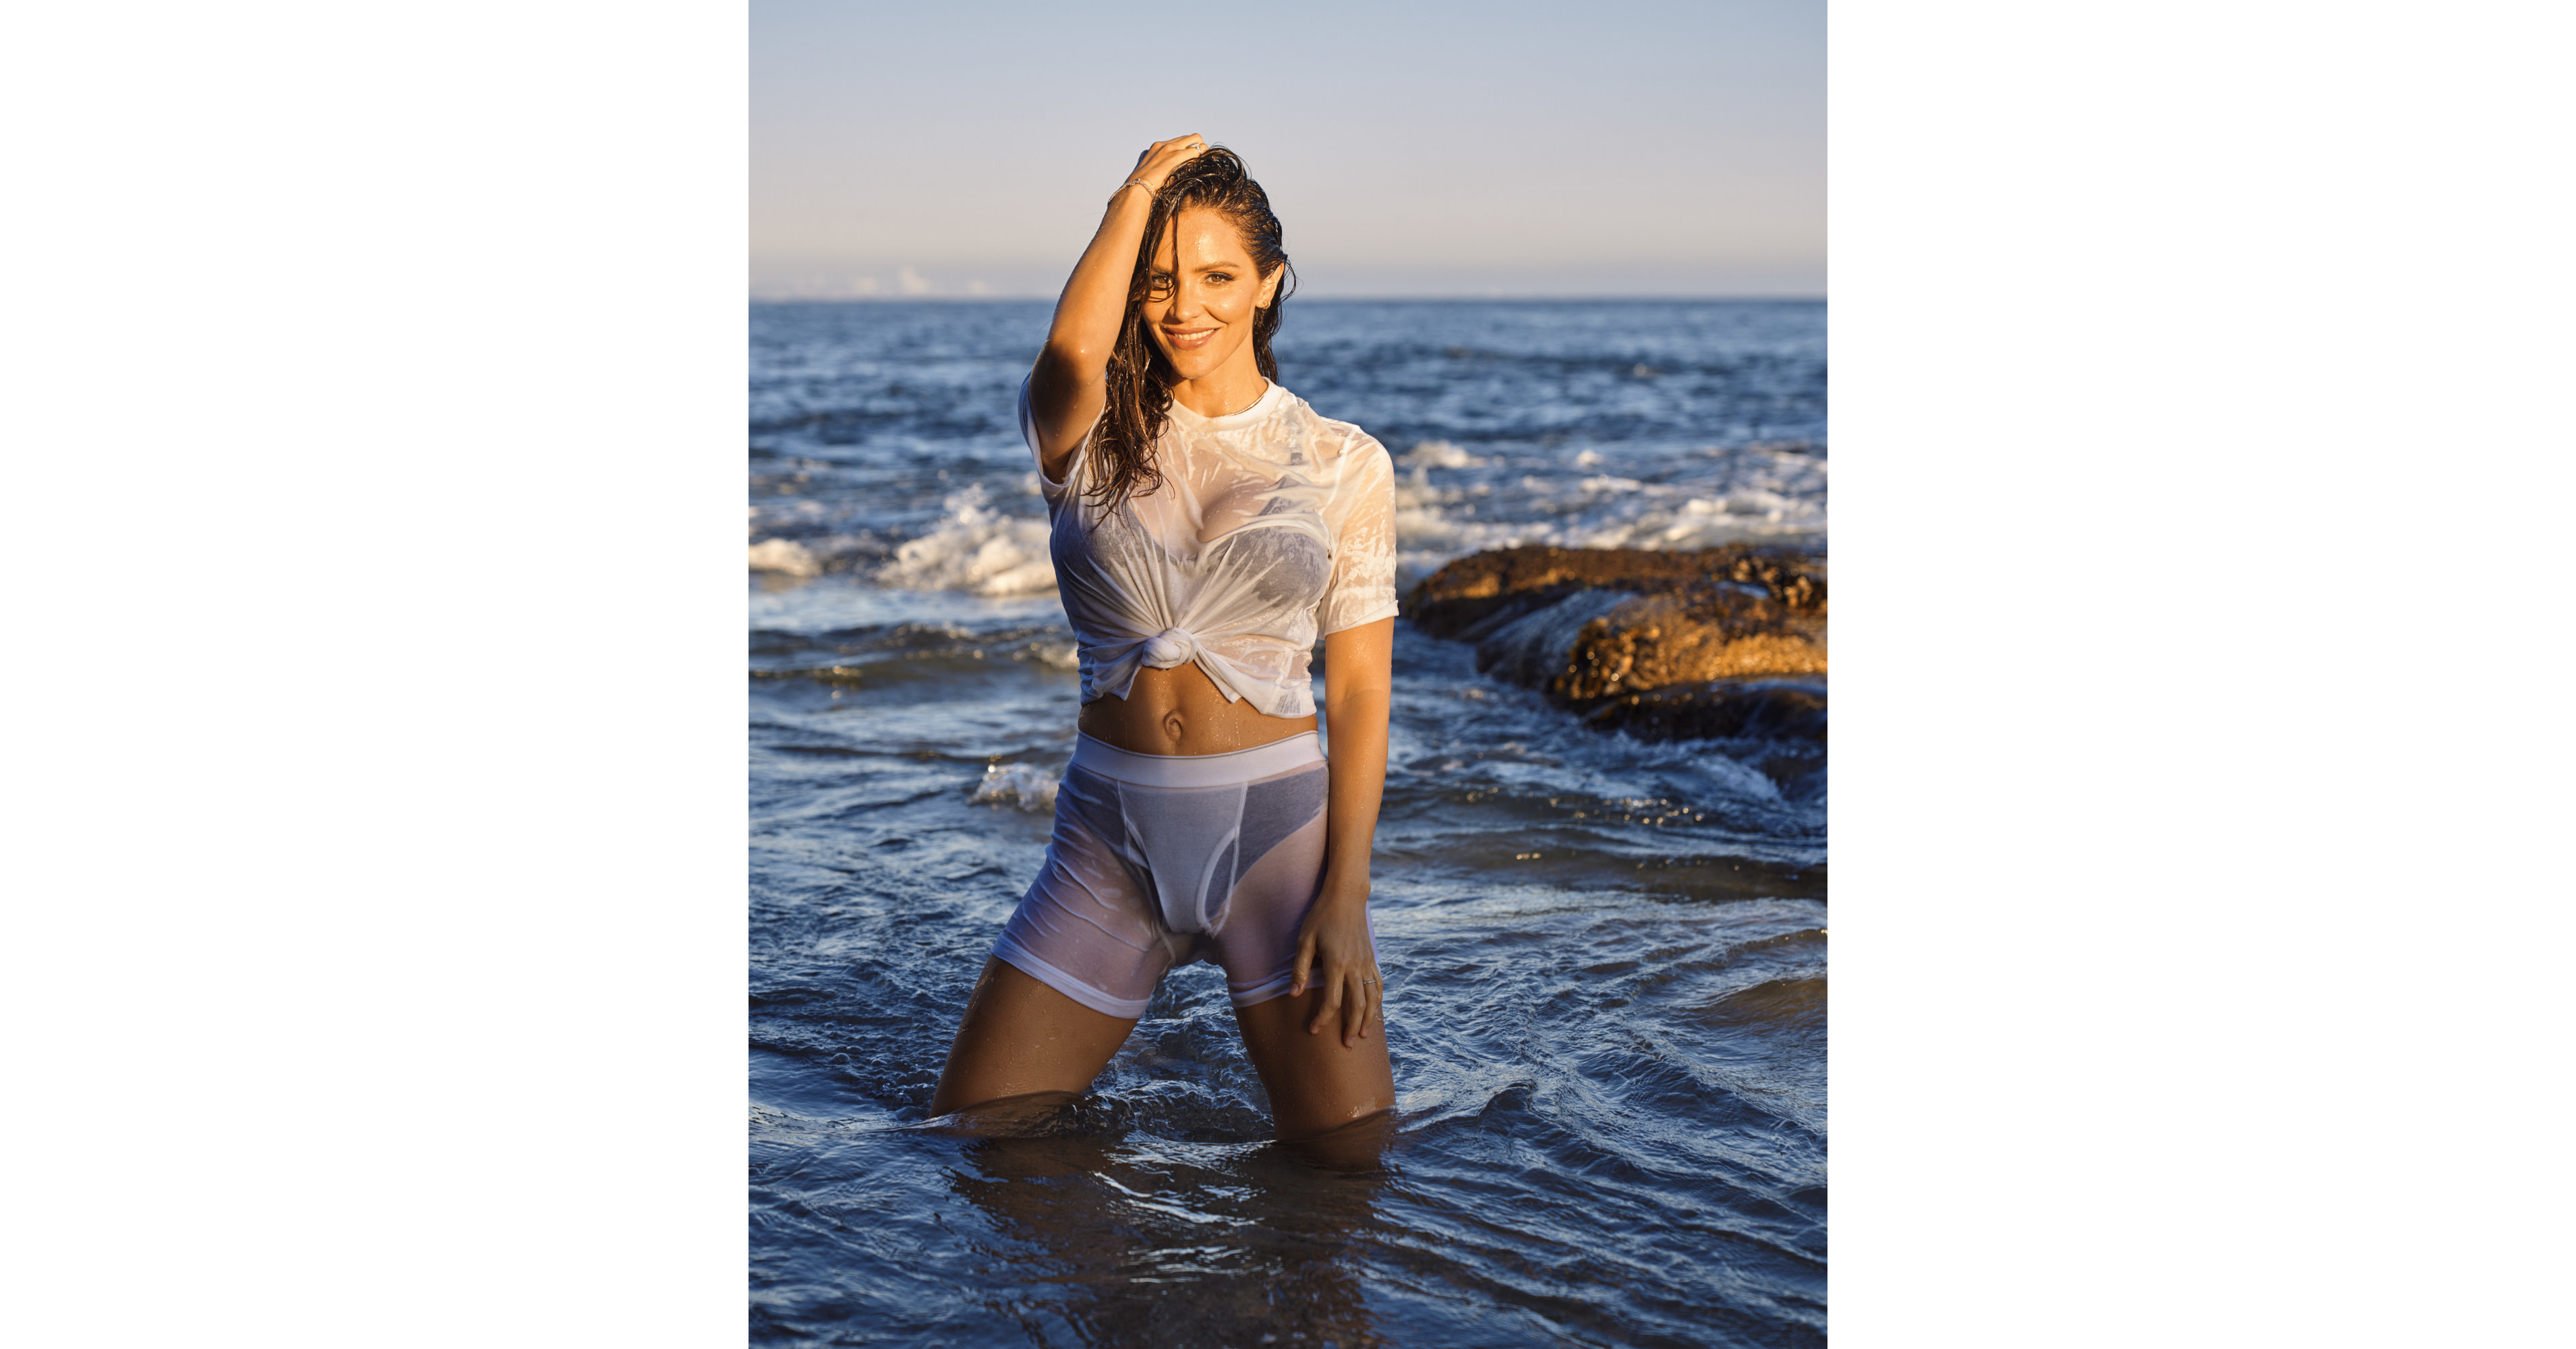 ACTRESS KATHARINE MCPHEE FOSTER AND MINDD BRA COMPANY LAUNCH OCEANA  INTIMATES COLLECTION IN CELEBRATION OF EARTH DAY